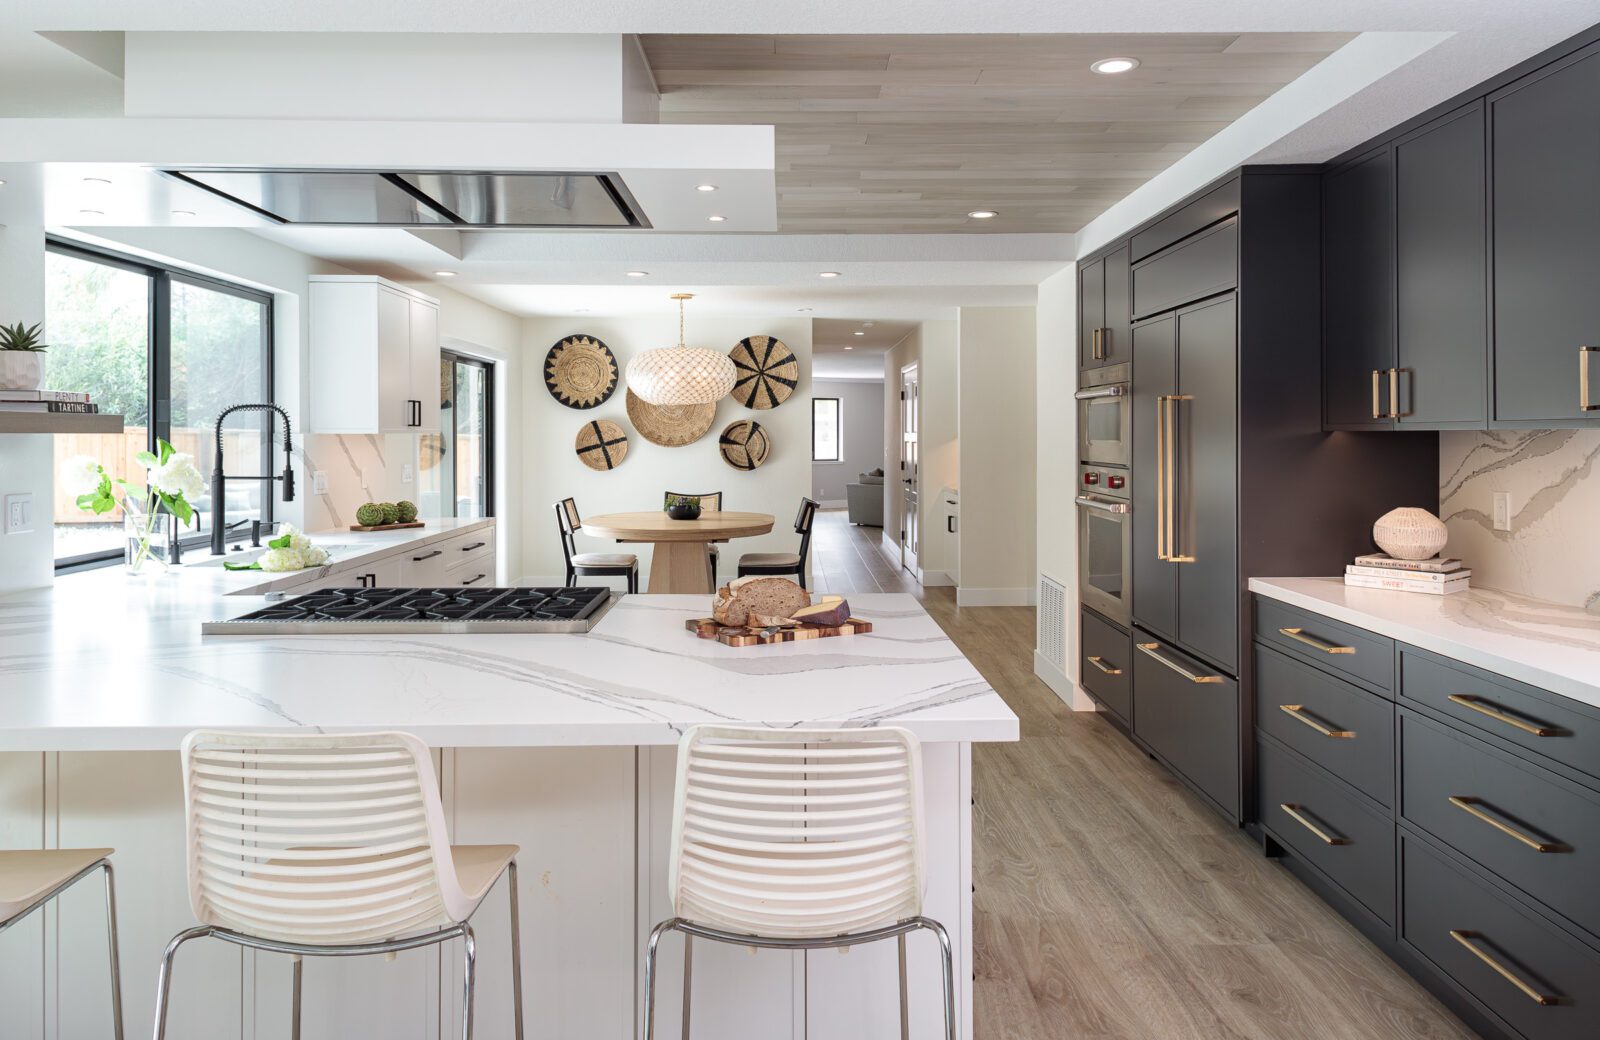 large kitchen with white and black cabinets, wood ceiling, LVP floors